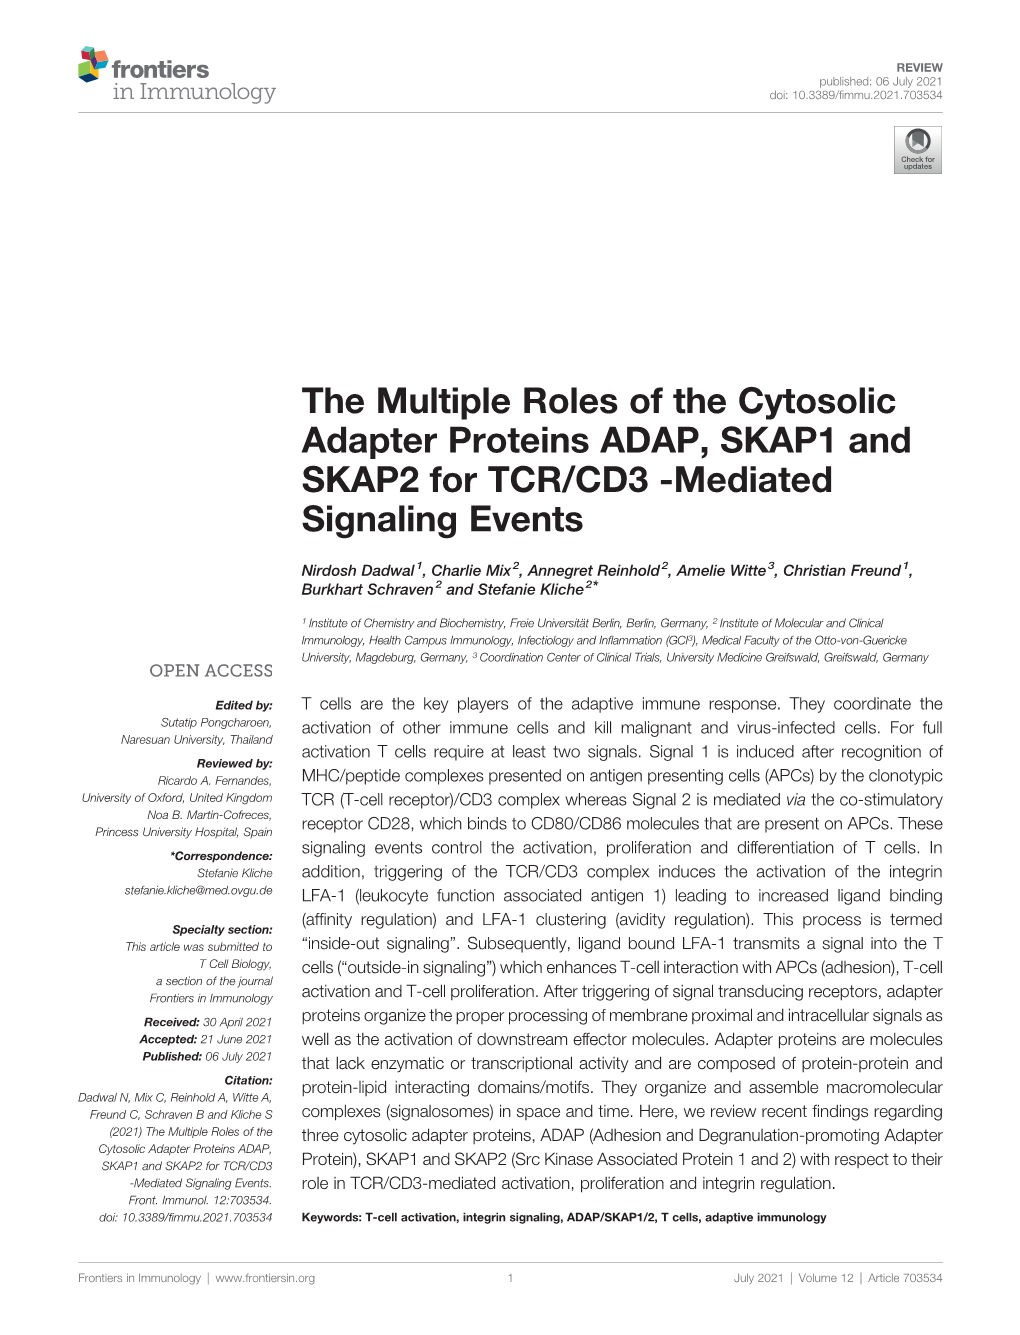 The Multiple Roles of the Cytosolic Adapter Proteins ADAP, SKAP1 and SKAP2 for TCR/CD3 -Mediated Signaling Events